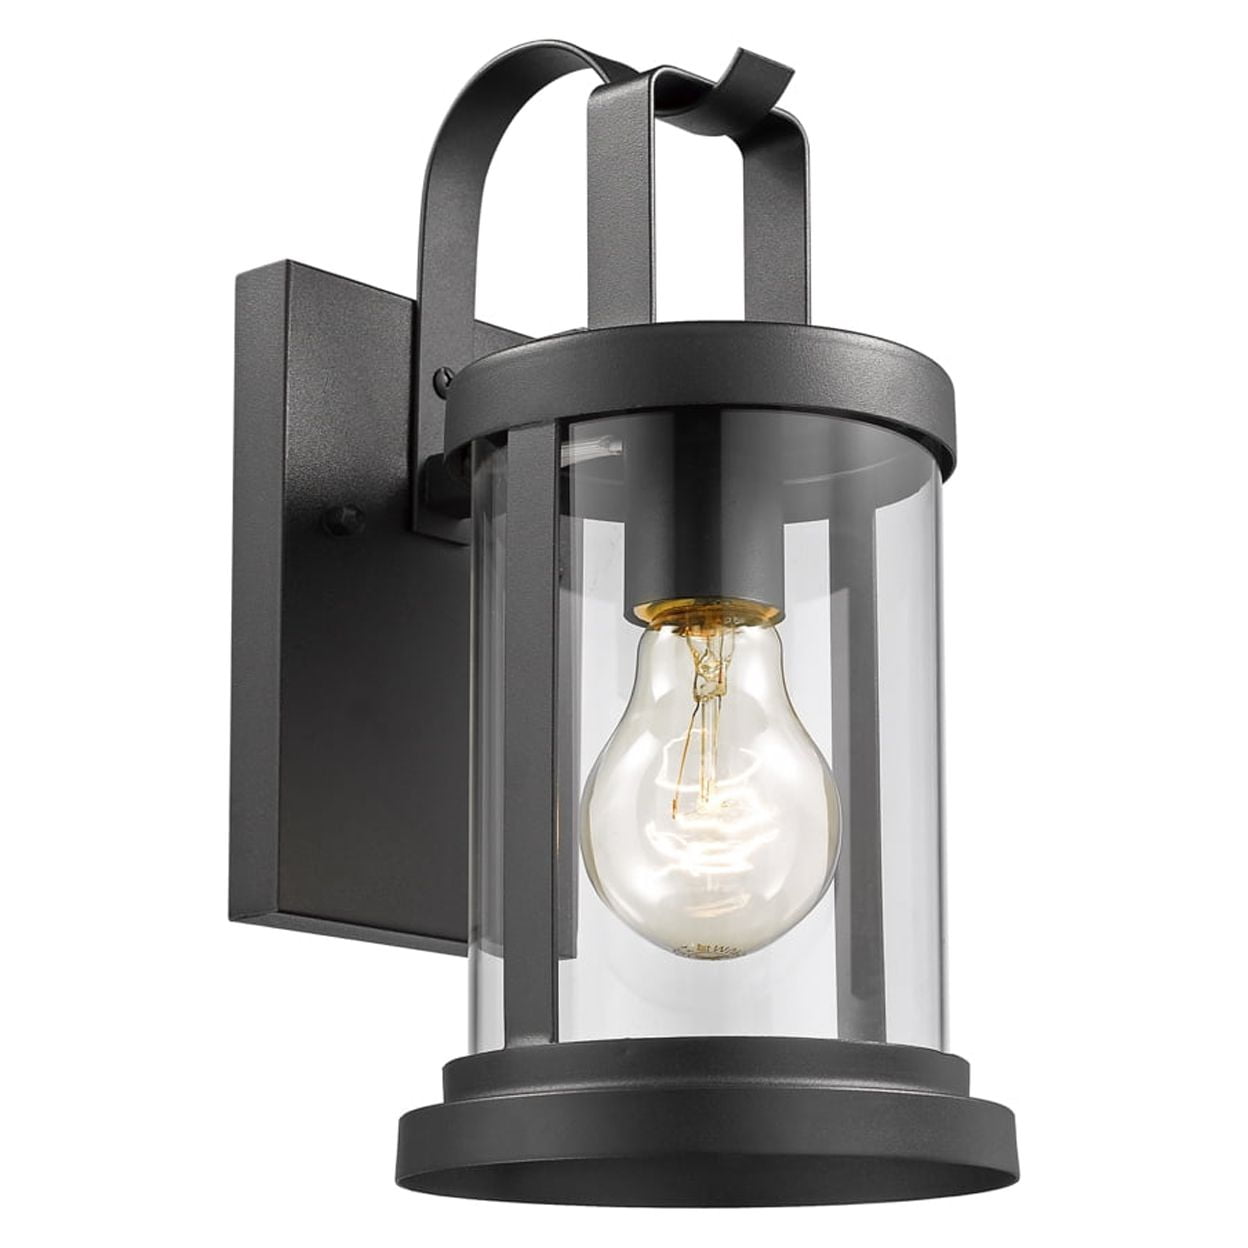 Ch2s089bk11-od1 Kash Transitional 1 Light Textured Black Outdoor Wall Sconce - 11 In.